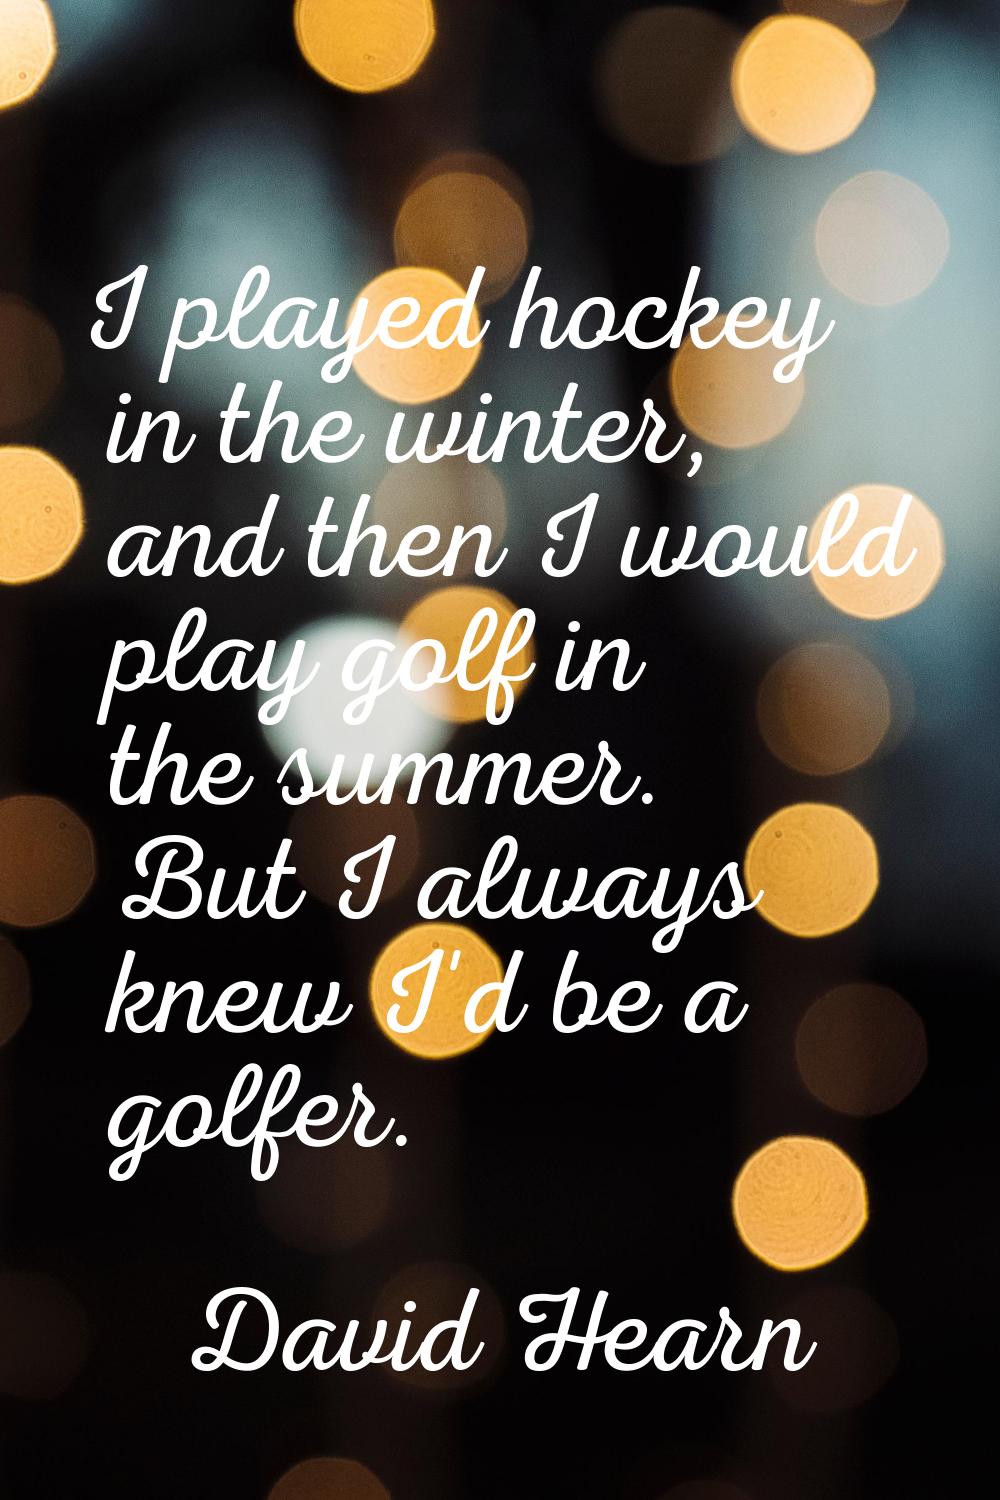 I played hockey in the winter, and then I would play golf in the summer. But I always knew I'd be a